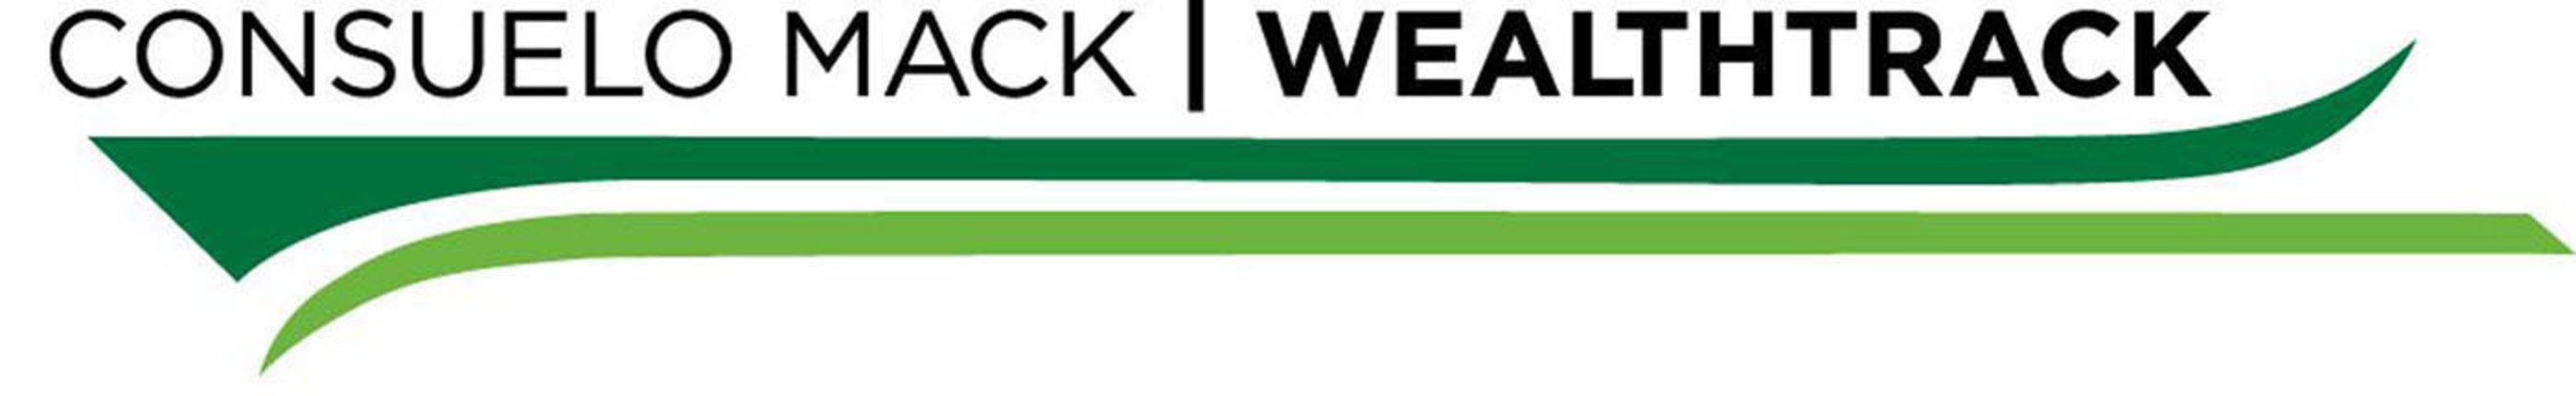 Financial television series "Consuelo Mack WealthTrack" provides trustworthy, understandable advice about building and protecting wealth from the best minds in the business world every week, nationwide on public television (check local listings). The series remains the only program on television devoted to long-term diversified investing and features frequent rare and exclusive interviews with acknowledged "Great Investors" and "Financial Thought Leaders." Award-winning, veteran business journalist Consuelo Mack is the series anchor and executive producer. Watch full episodes and more at http://wealthtrack.com. (PRNewsFoto/WNET)